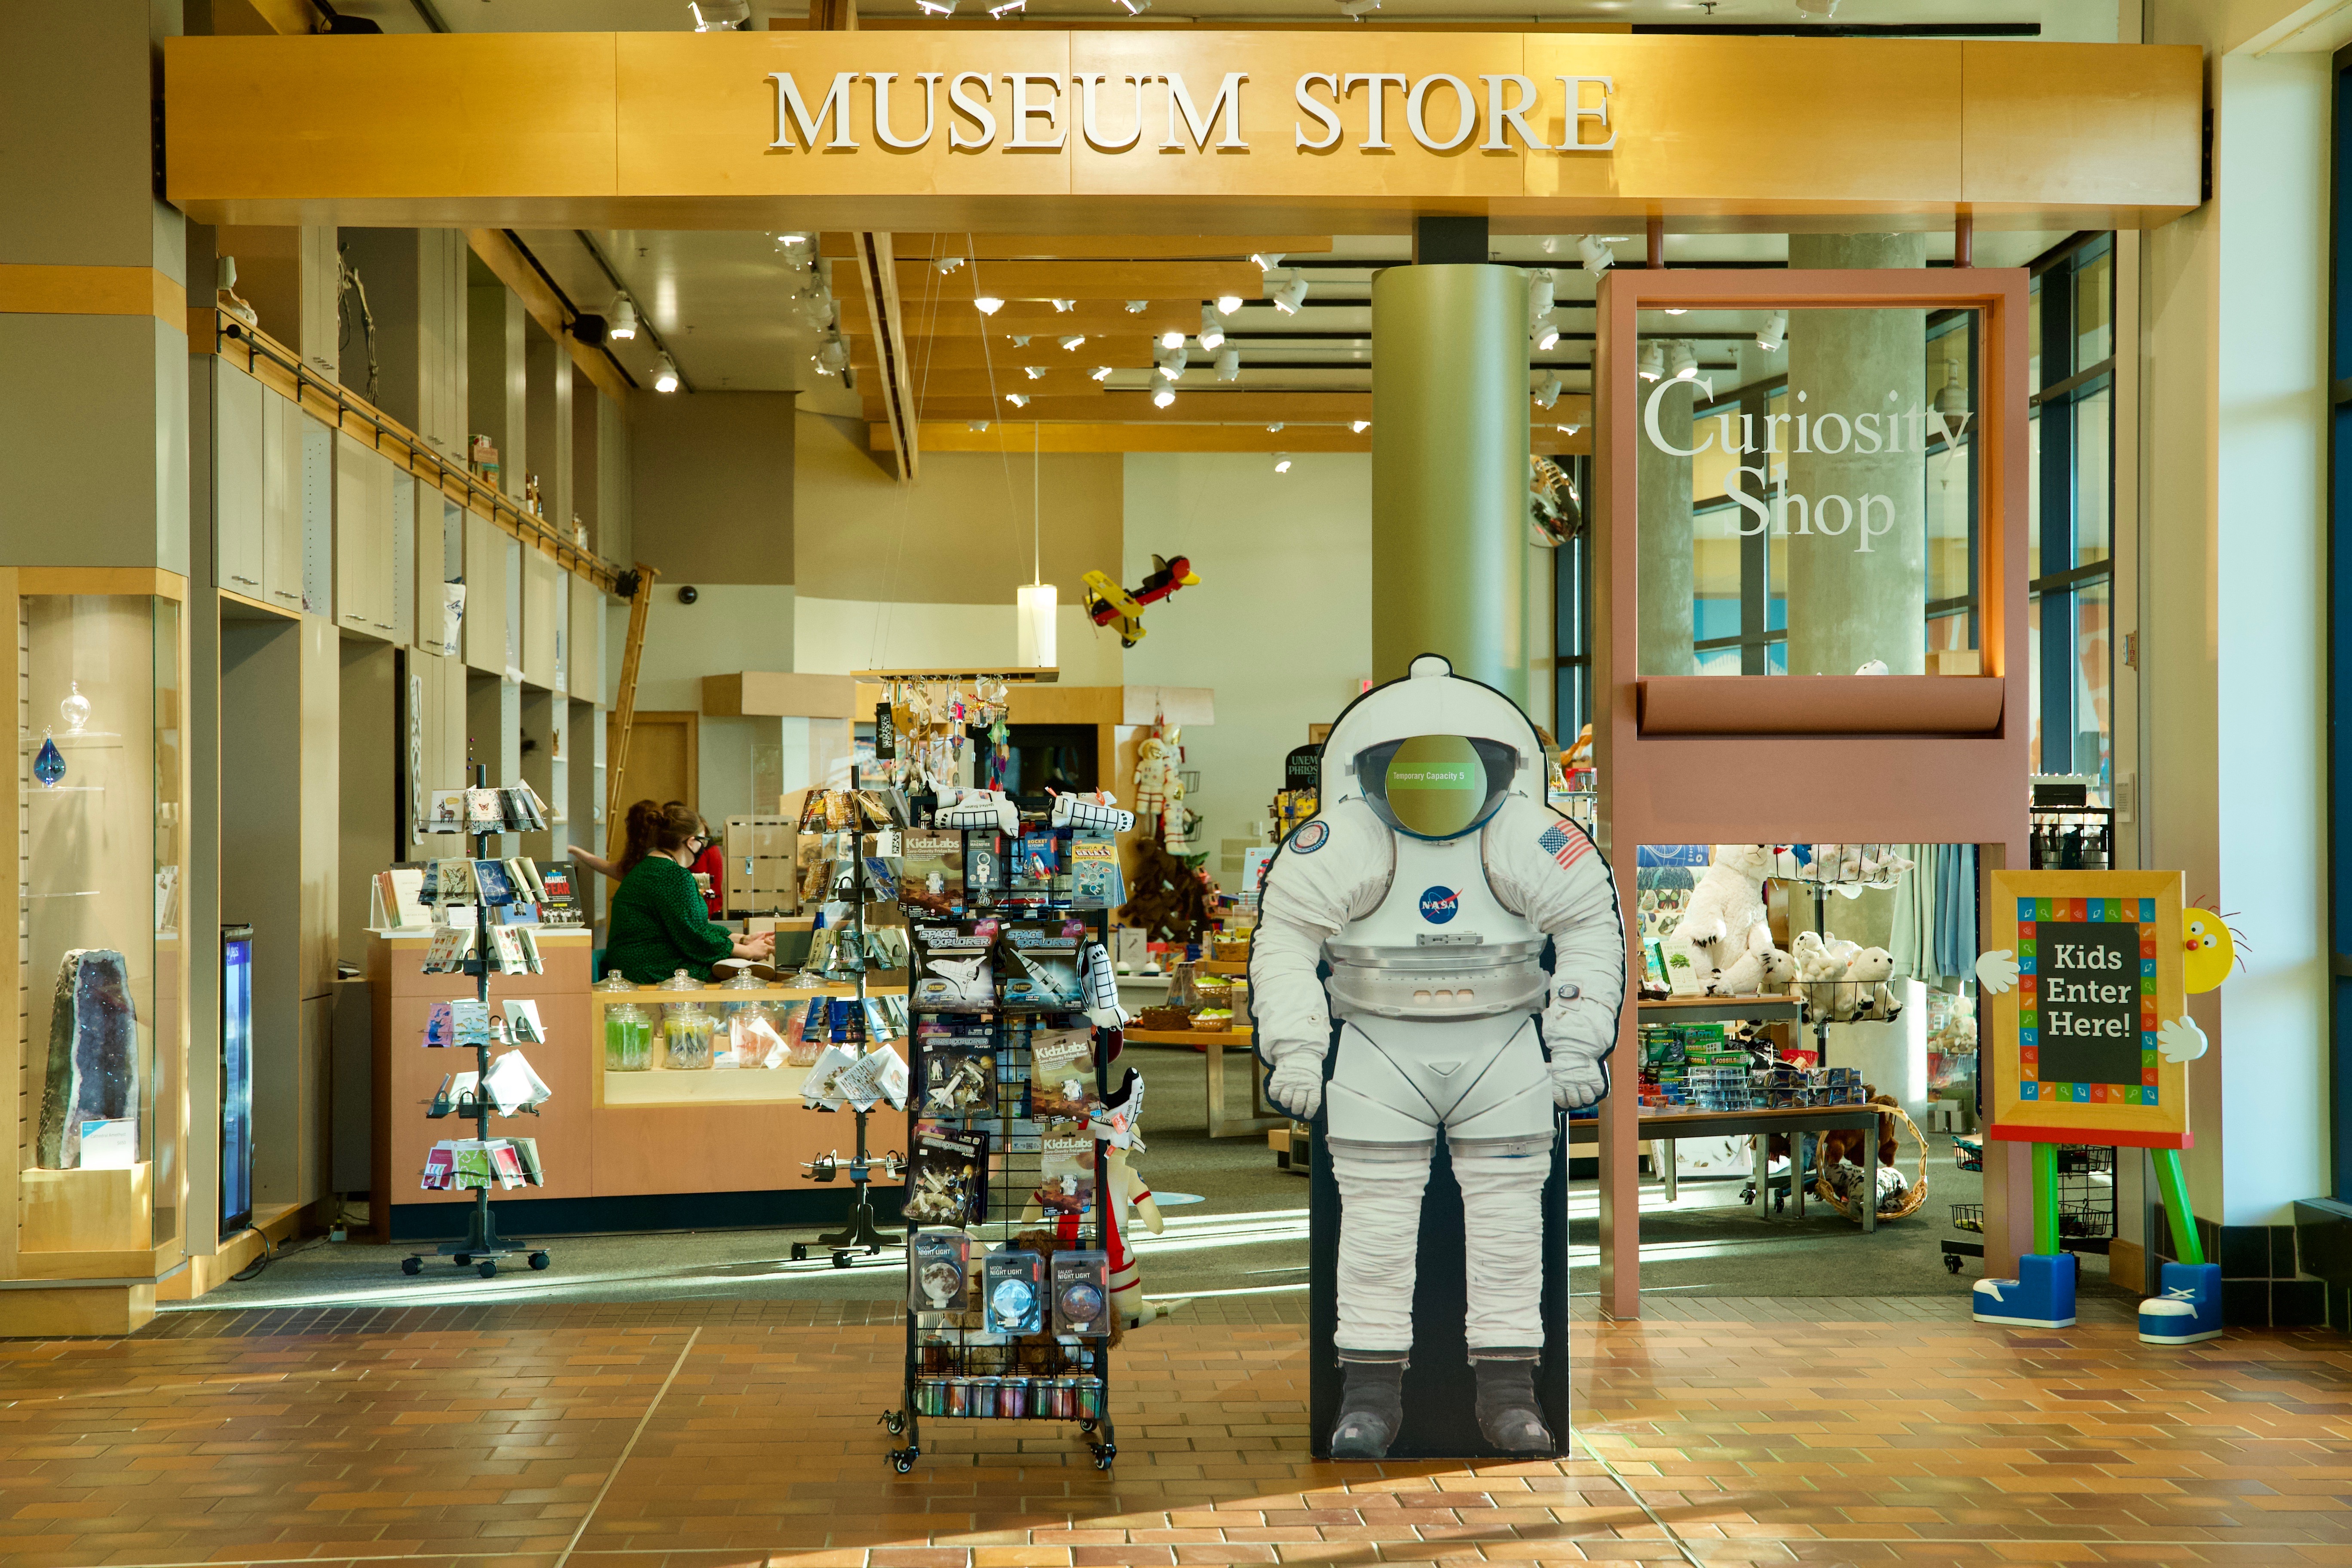 Museum and Gift Shop